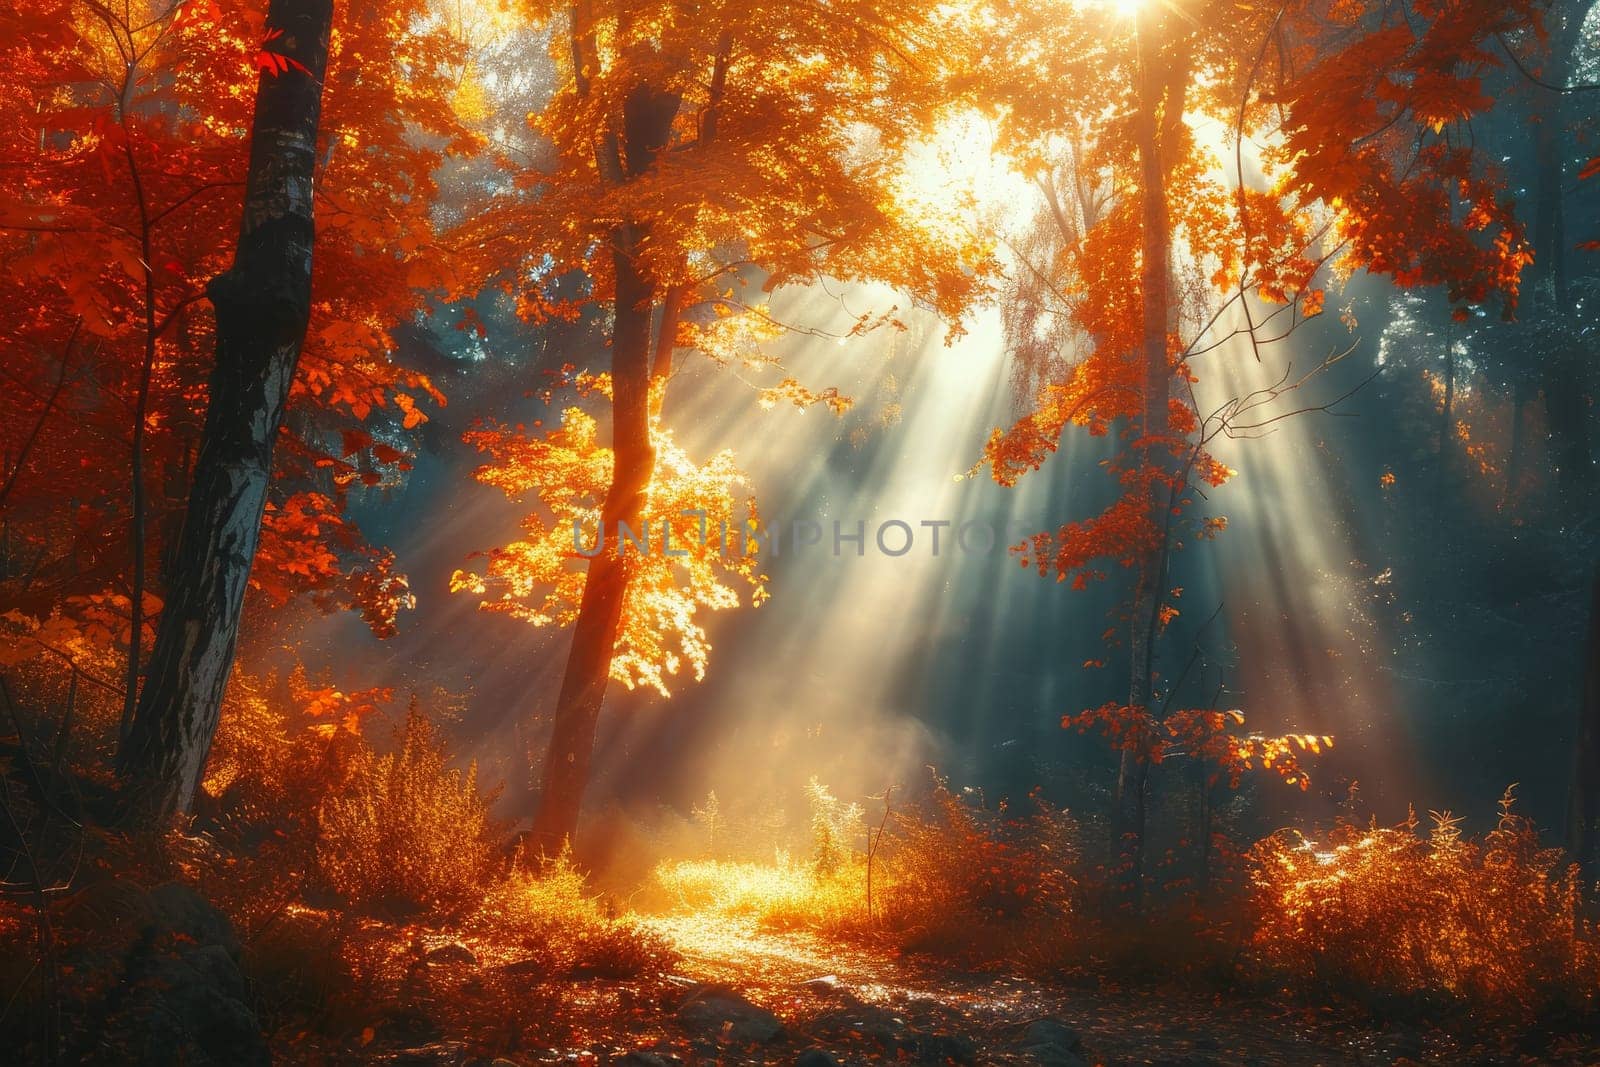 The sun is shining through the trees, casting a warm glow on the forest floor. The leaves are bright orange, creating a beautiful and peaceful atmosphere